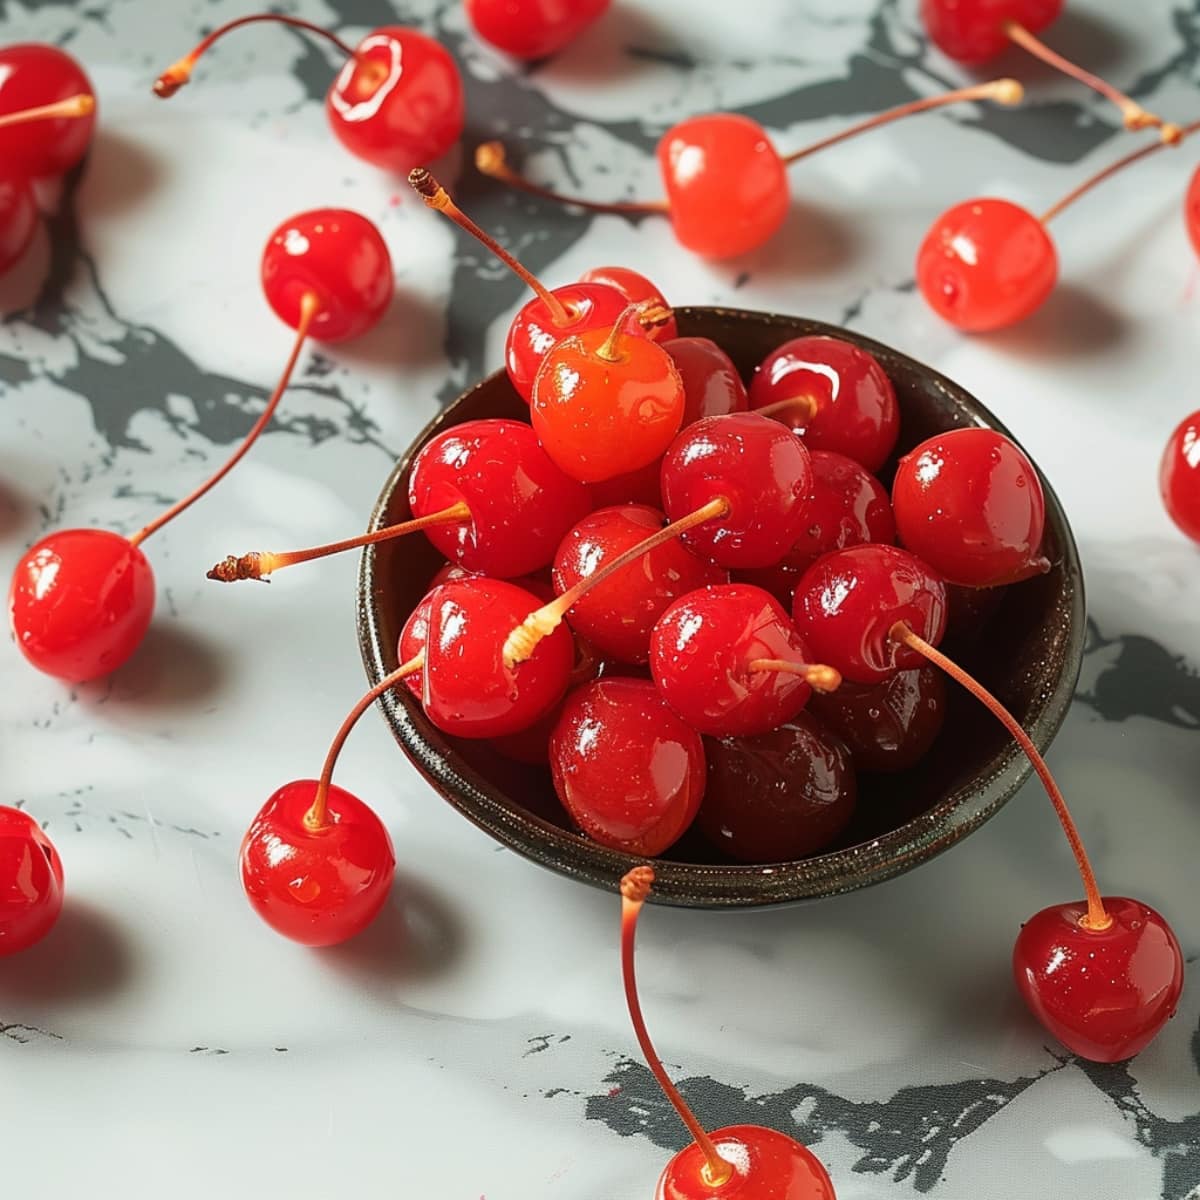 A bowl of fresh maraschino cherries on a white marble table